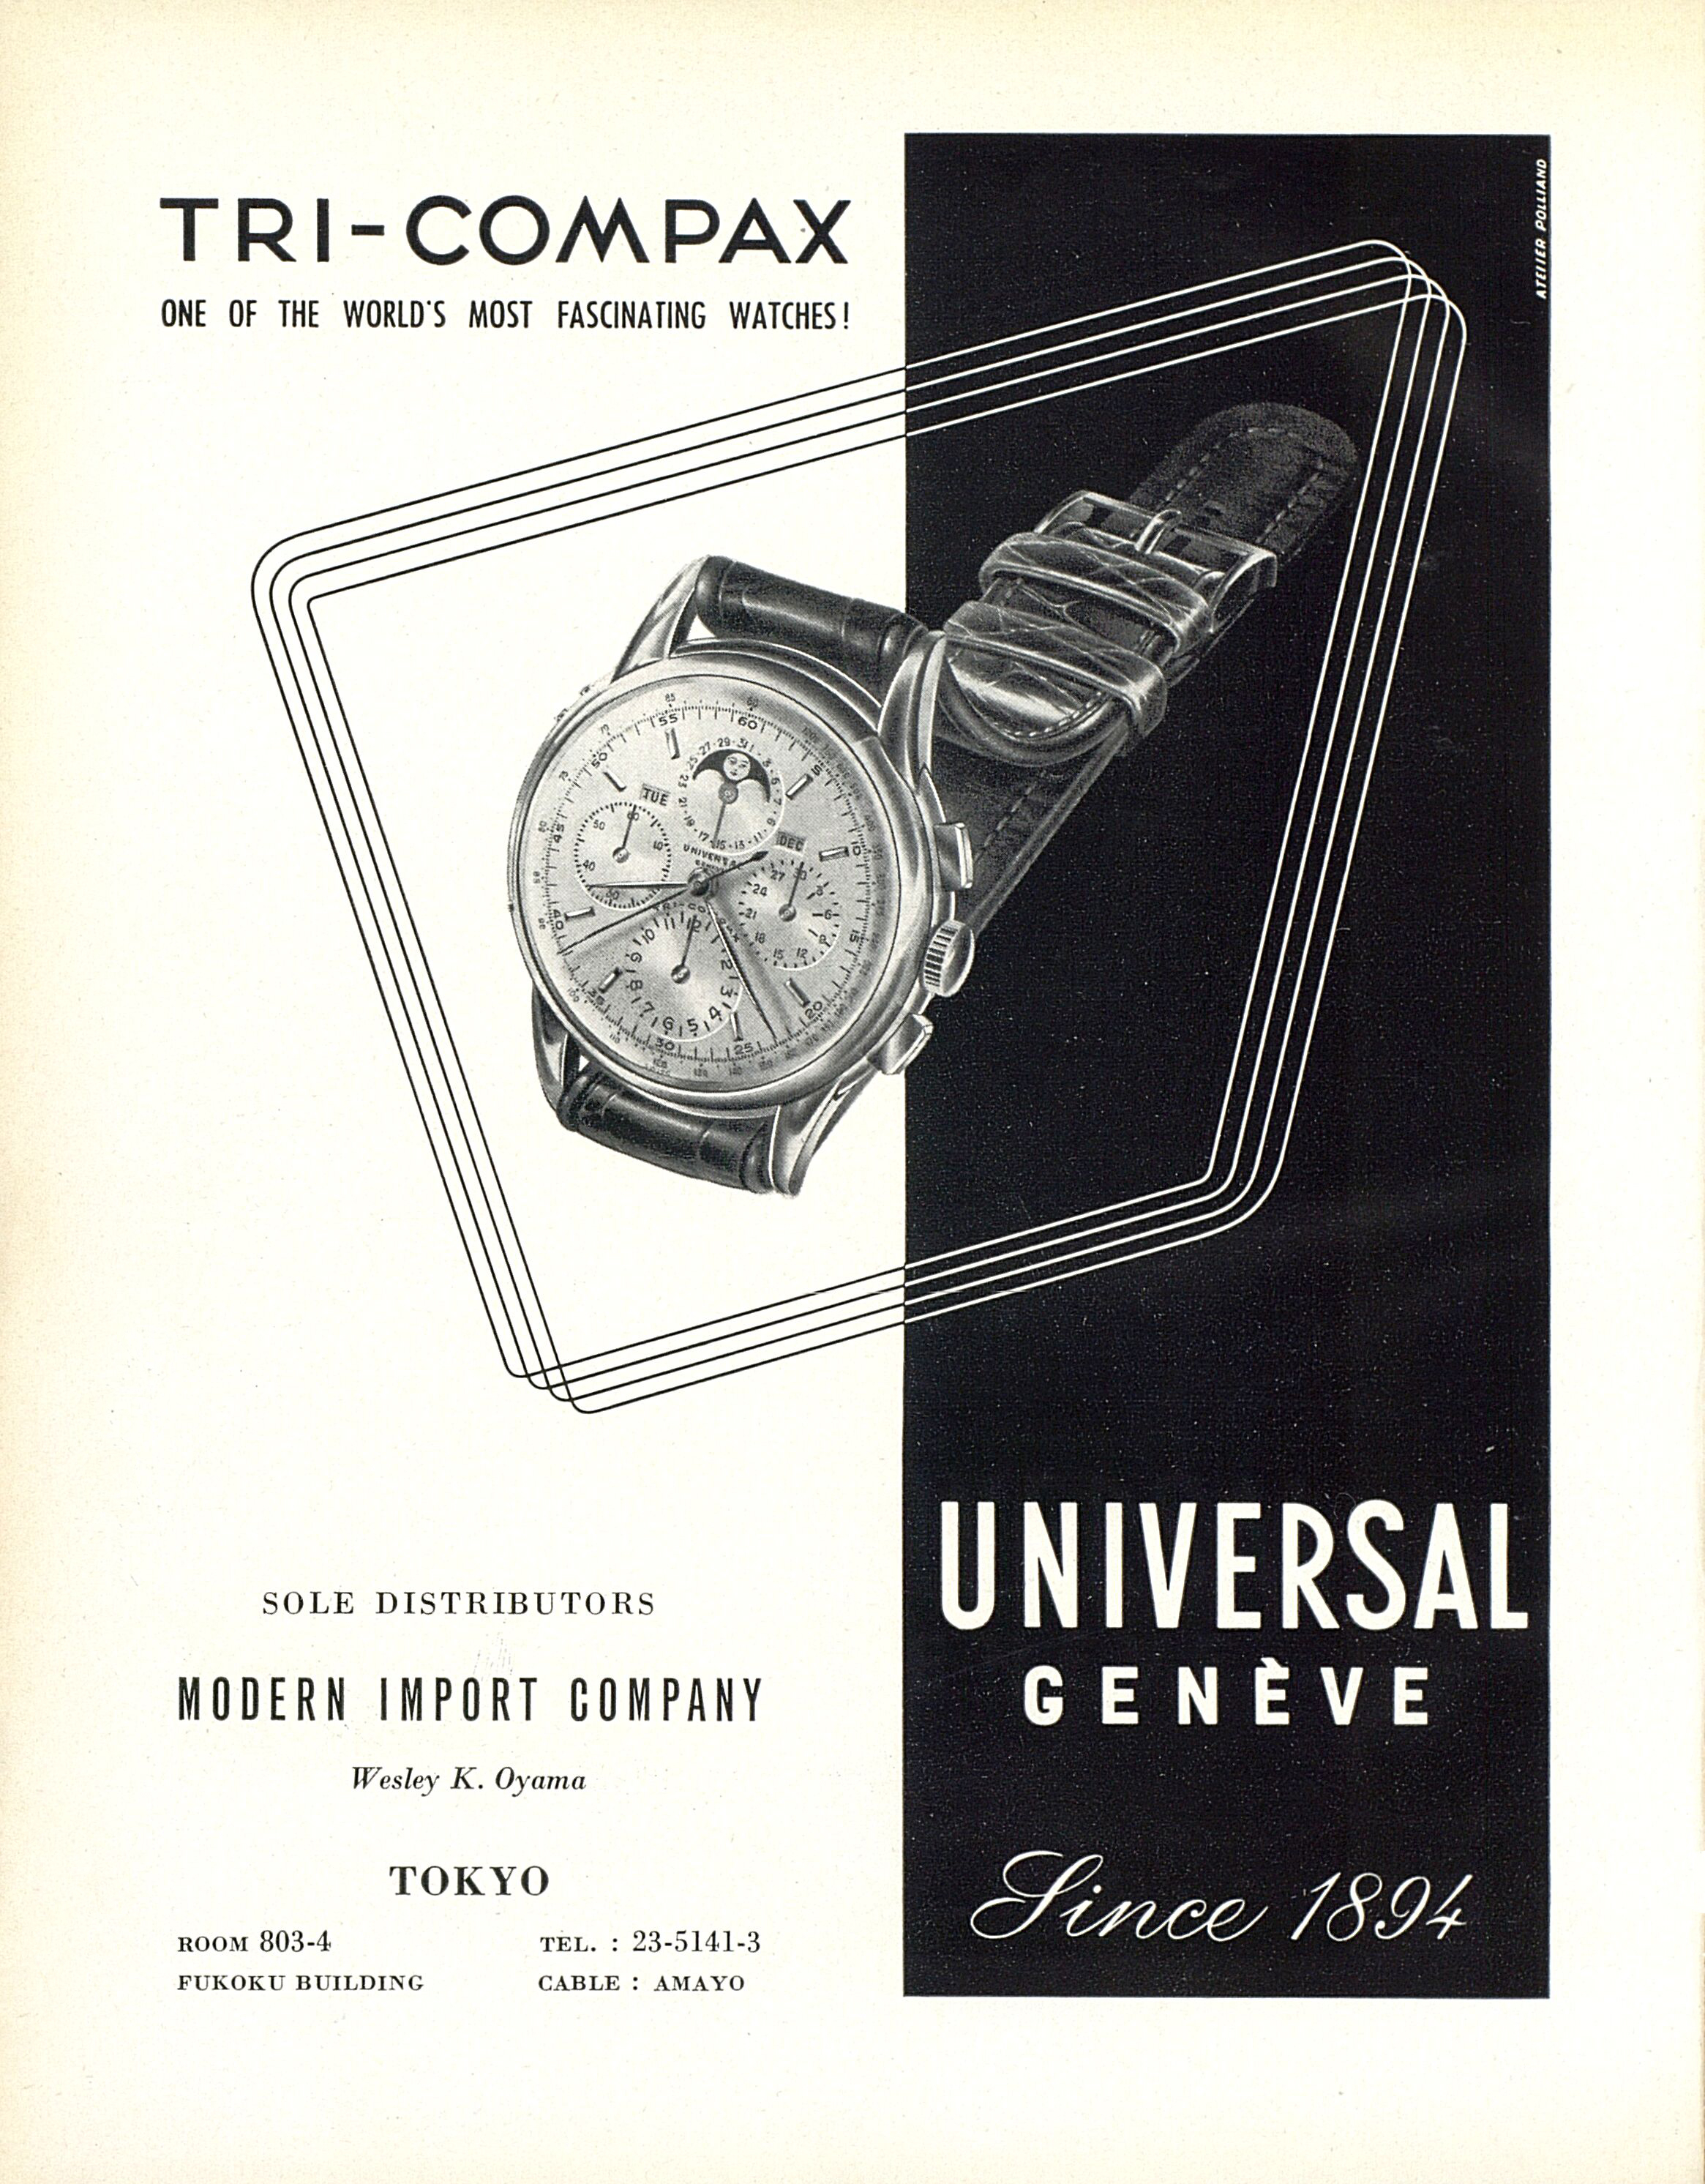 02_Vintage_ad_for_the_Universal_Geneve_Tri-Compax_published_in_Europa_Star_in_1952 Lifestyle